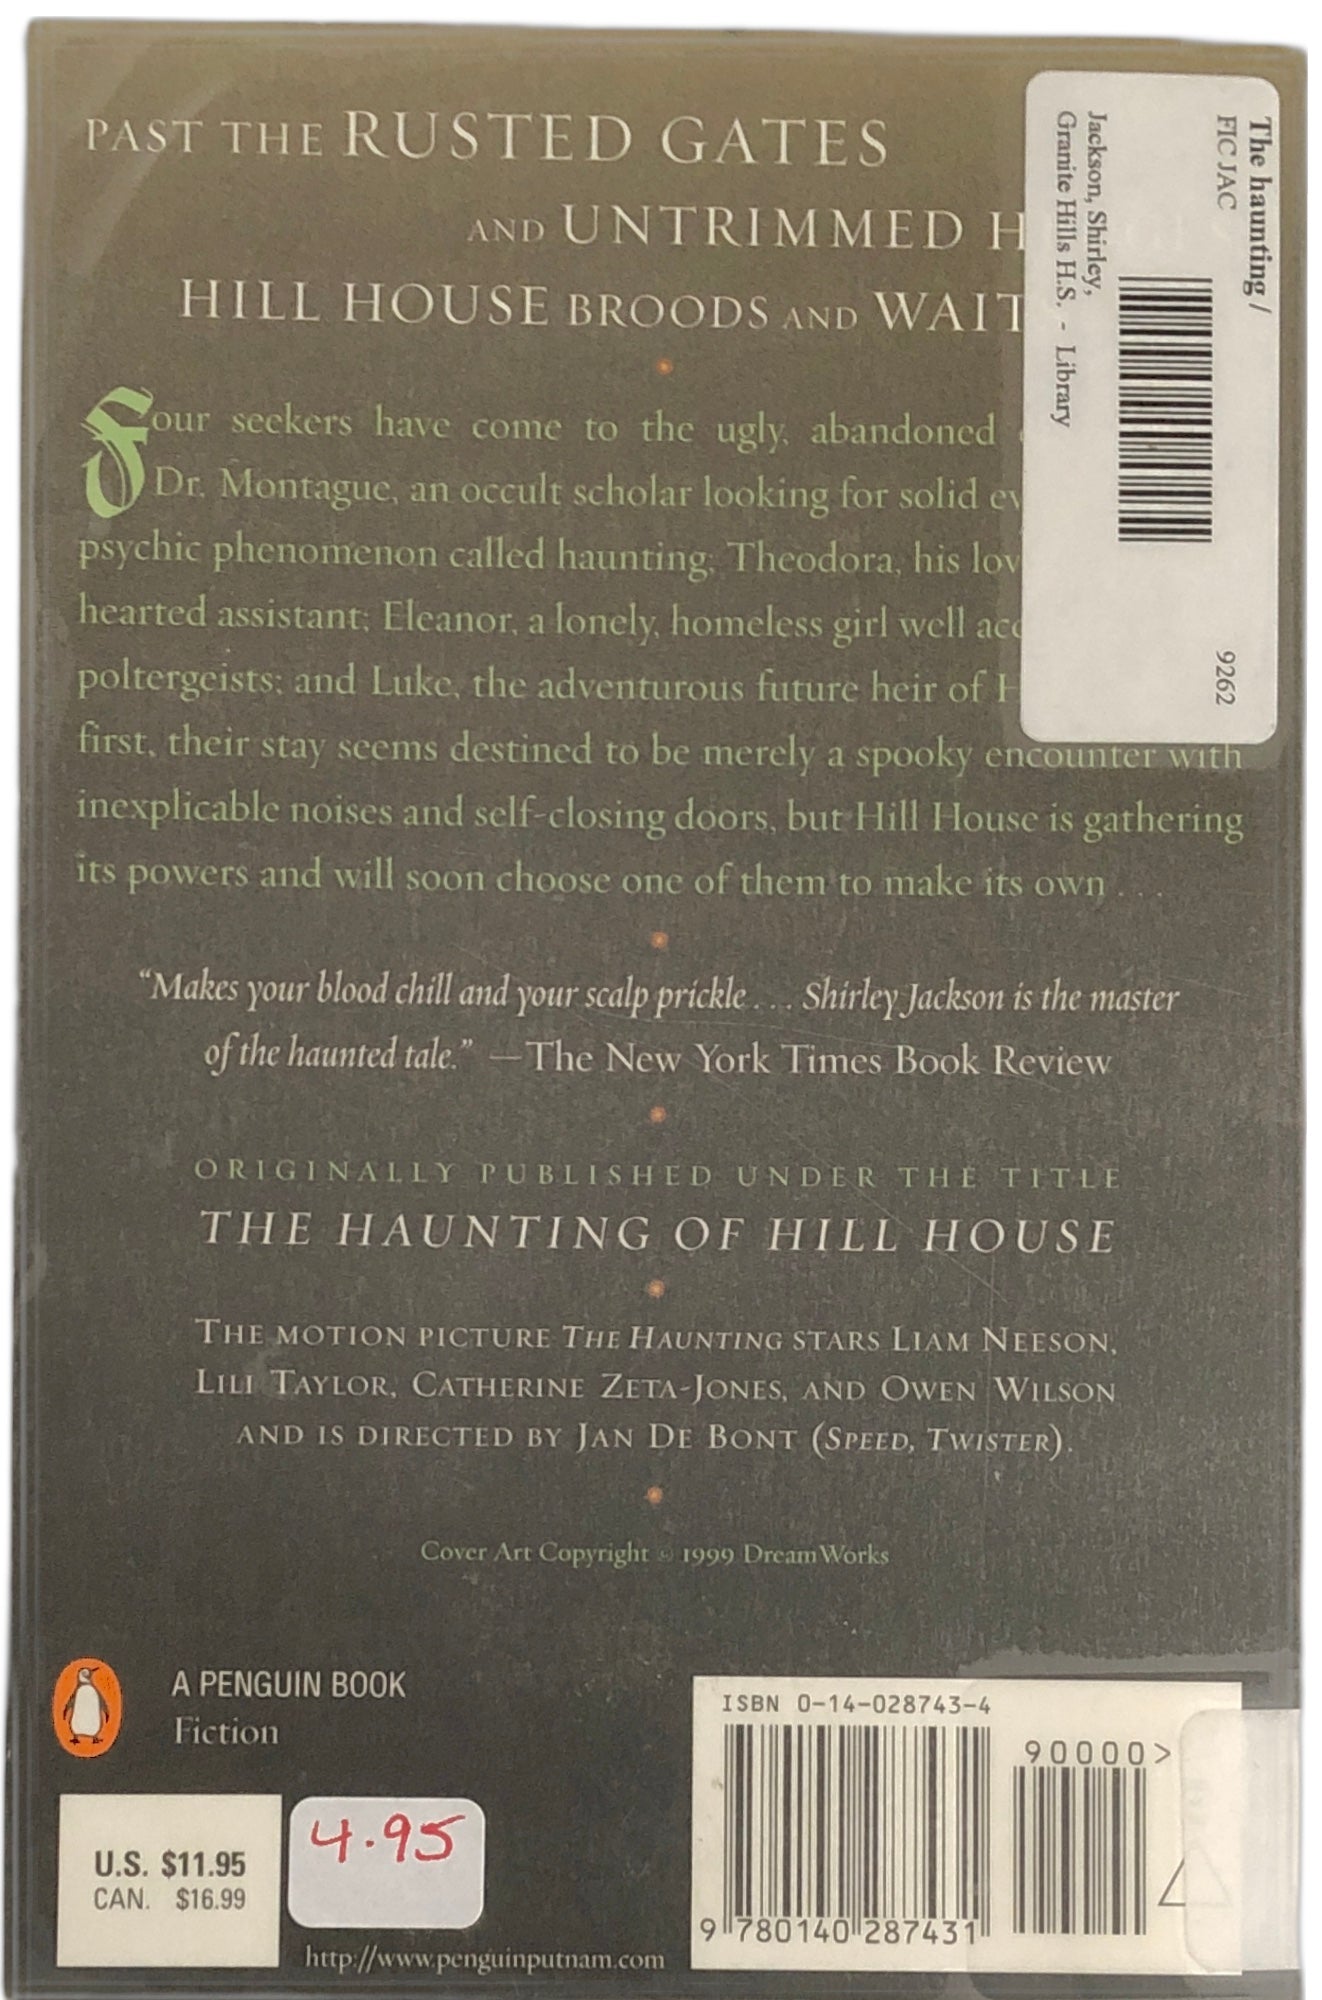 The Haunting by Shirley Jackson